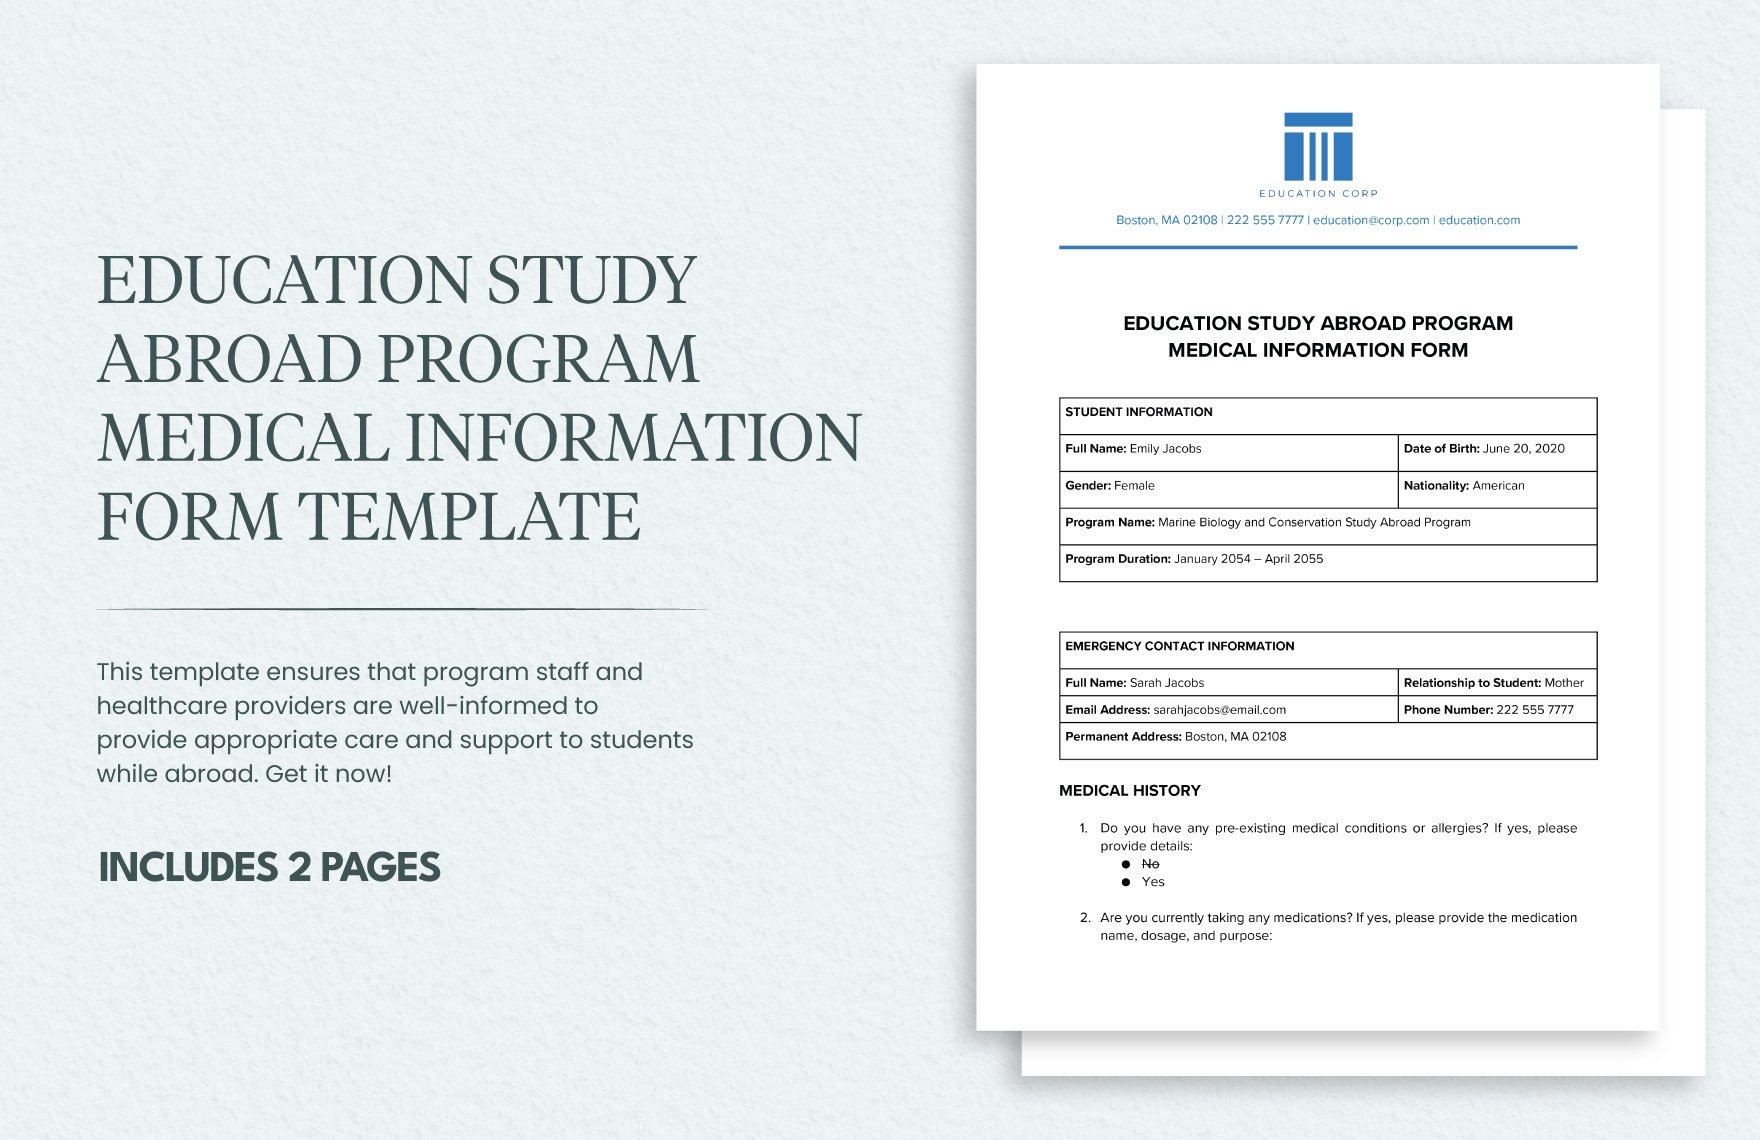 Education Study Abroad Program Medical Information Form Template